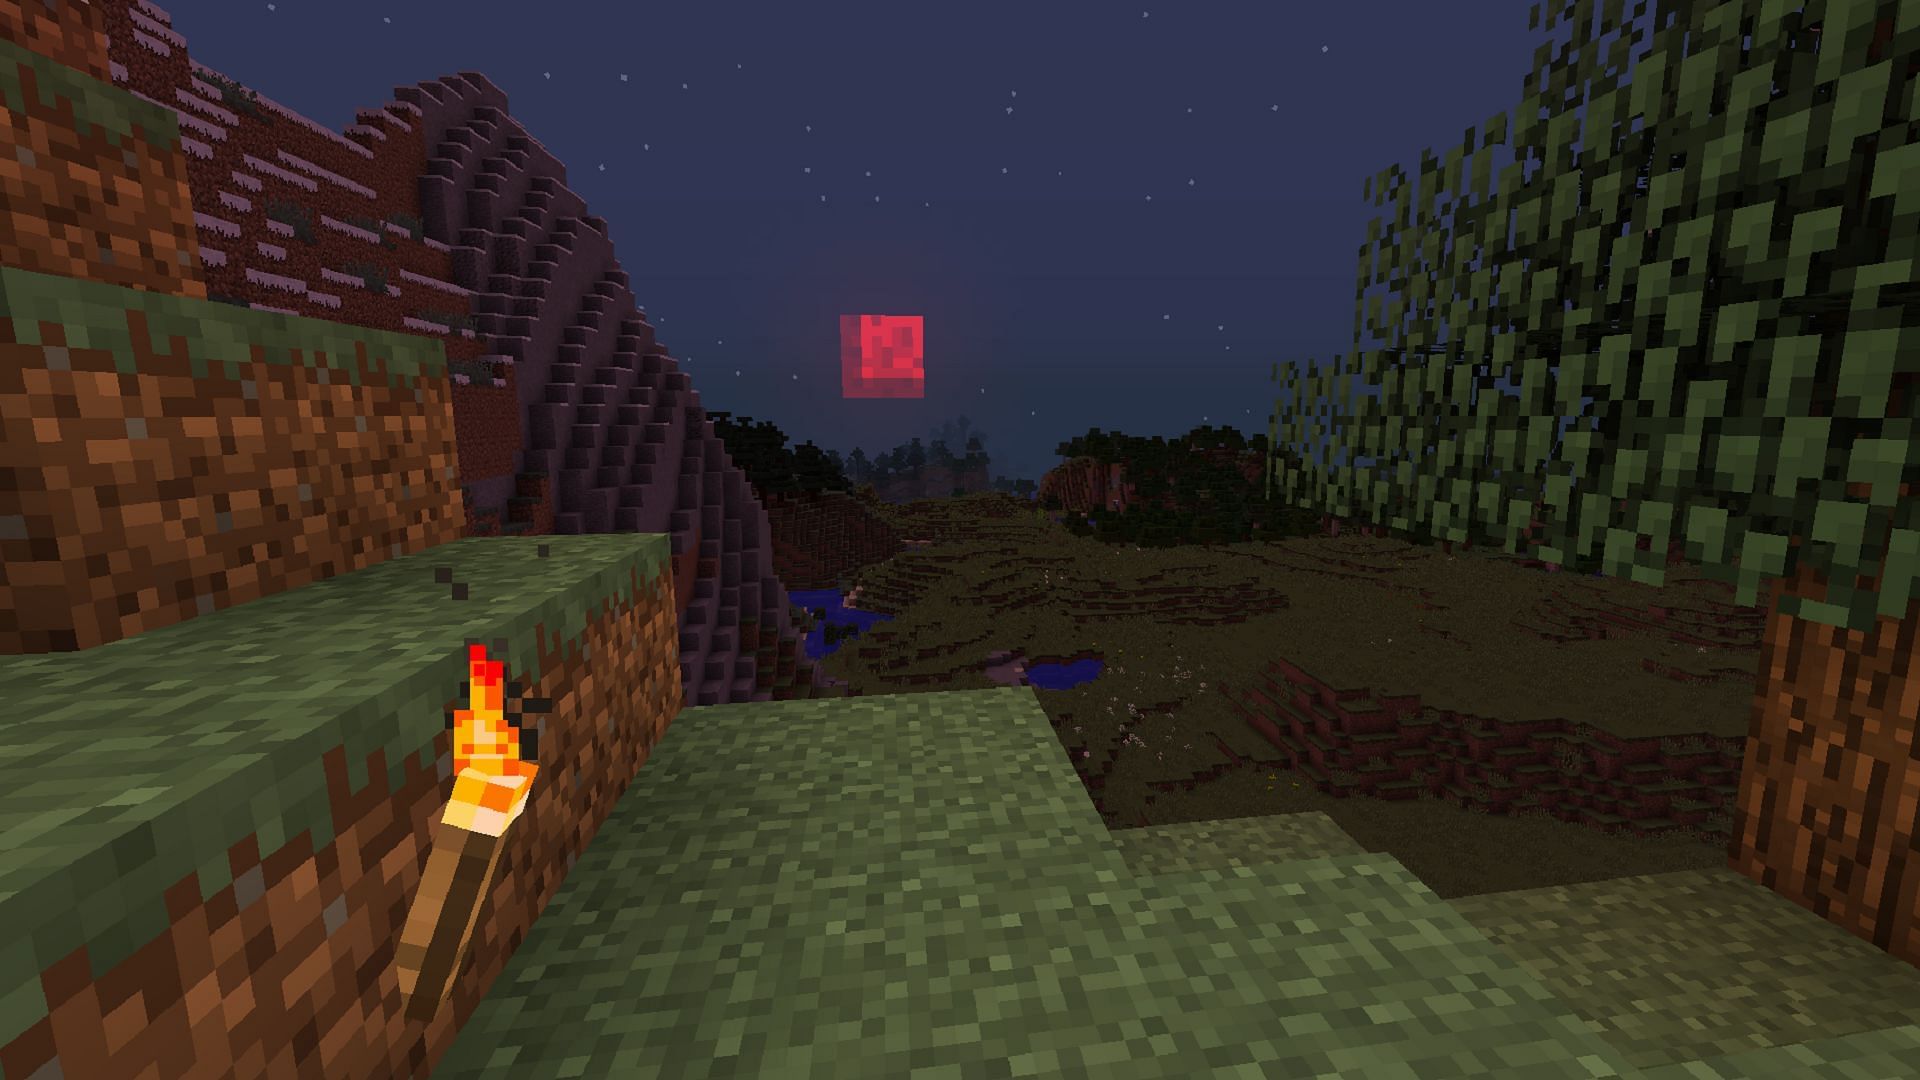 Bloodmoon increases difficulty during some nights in Minecraft like in Terraria (Image via Lumien231/CurseForge)